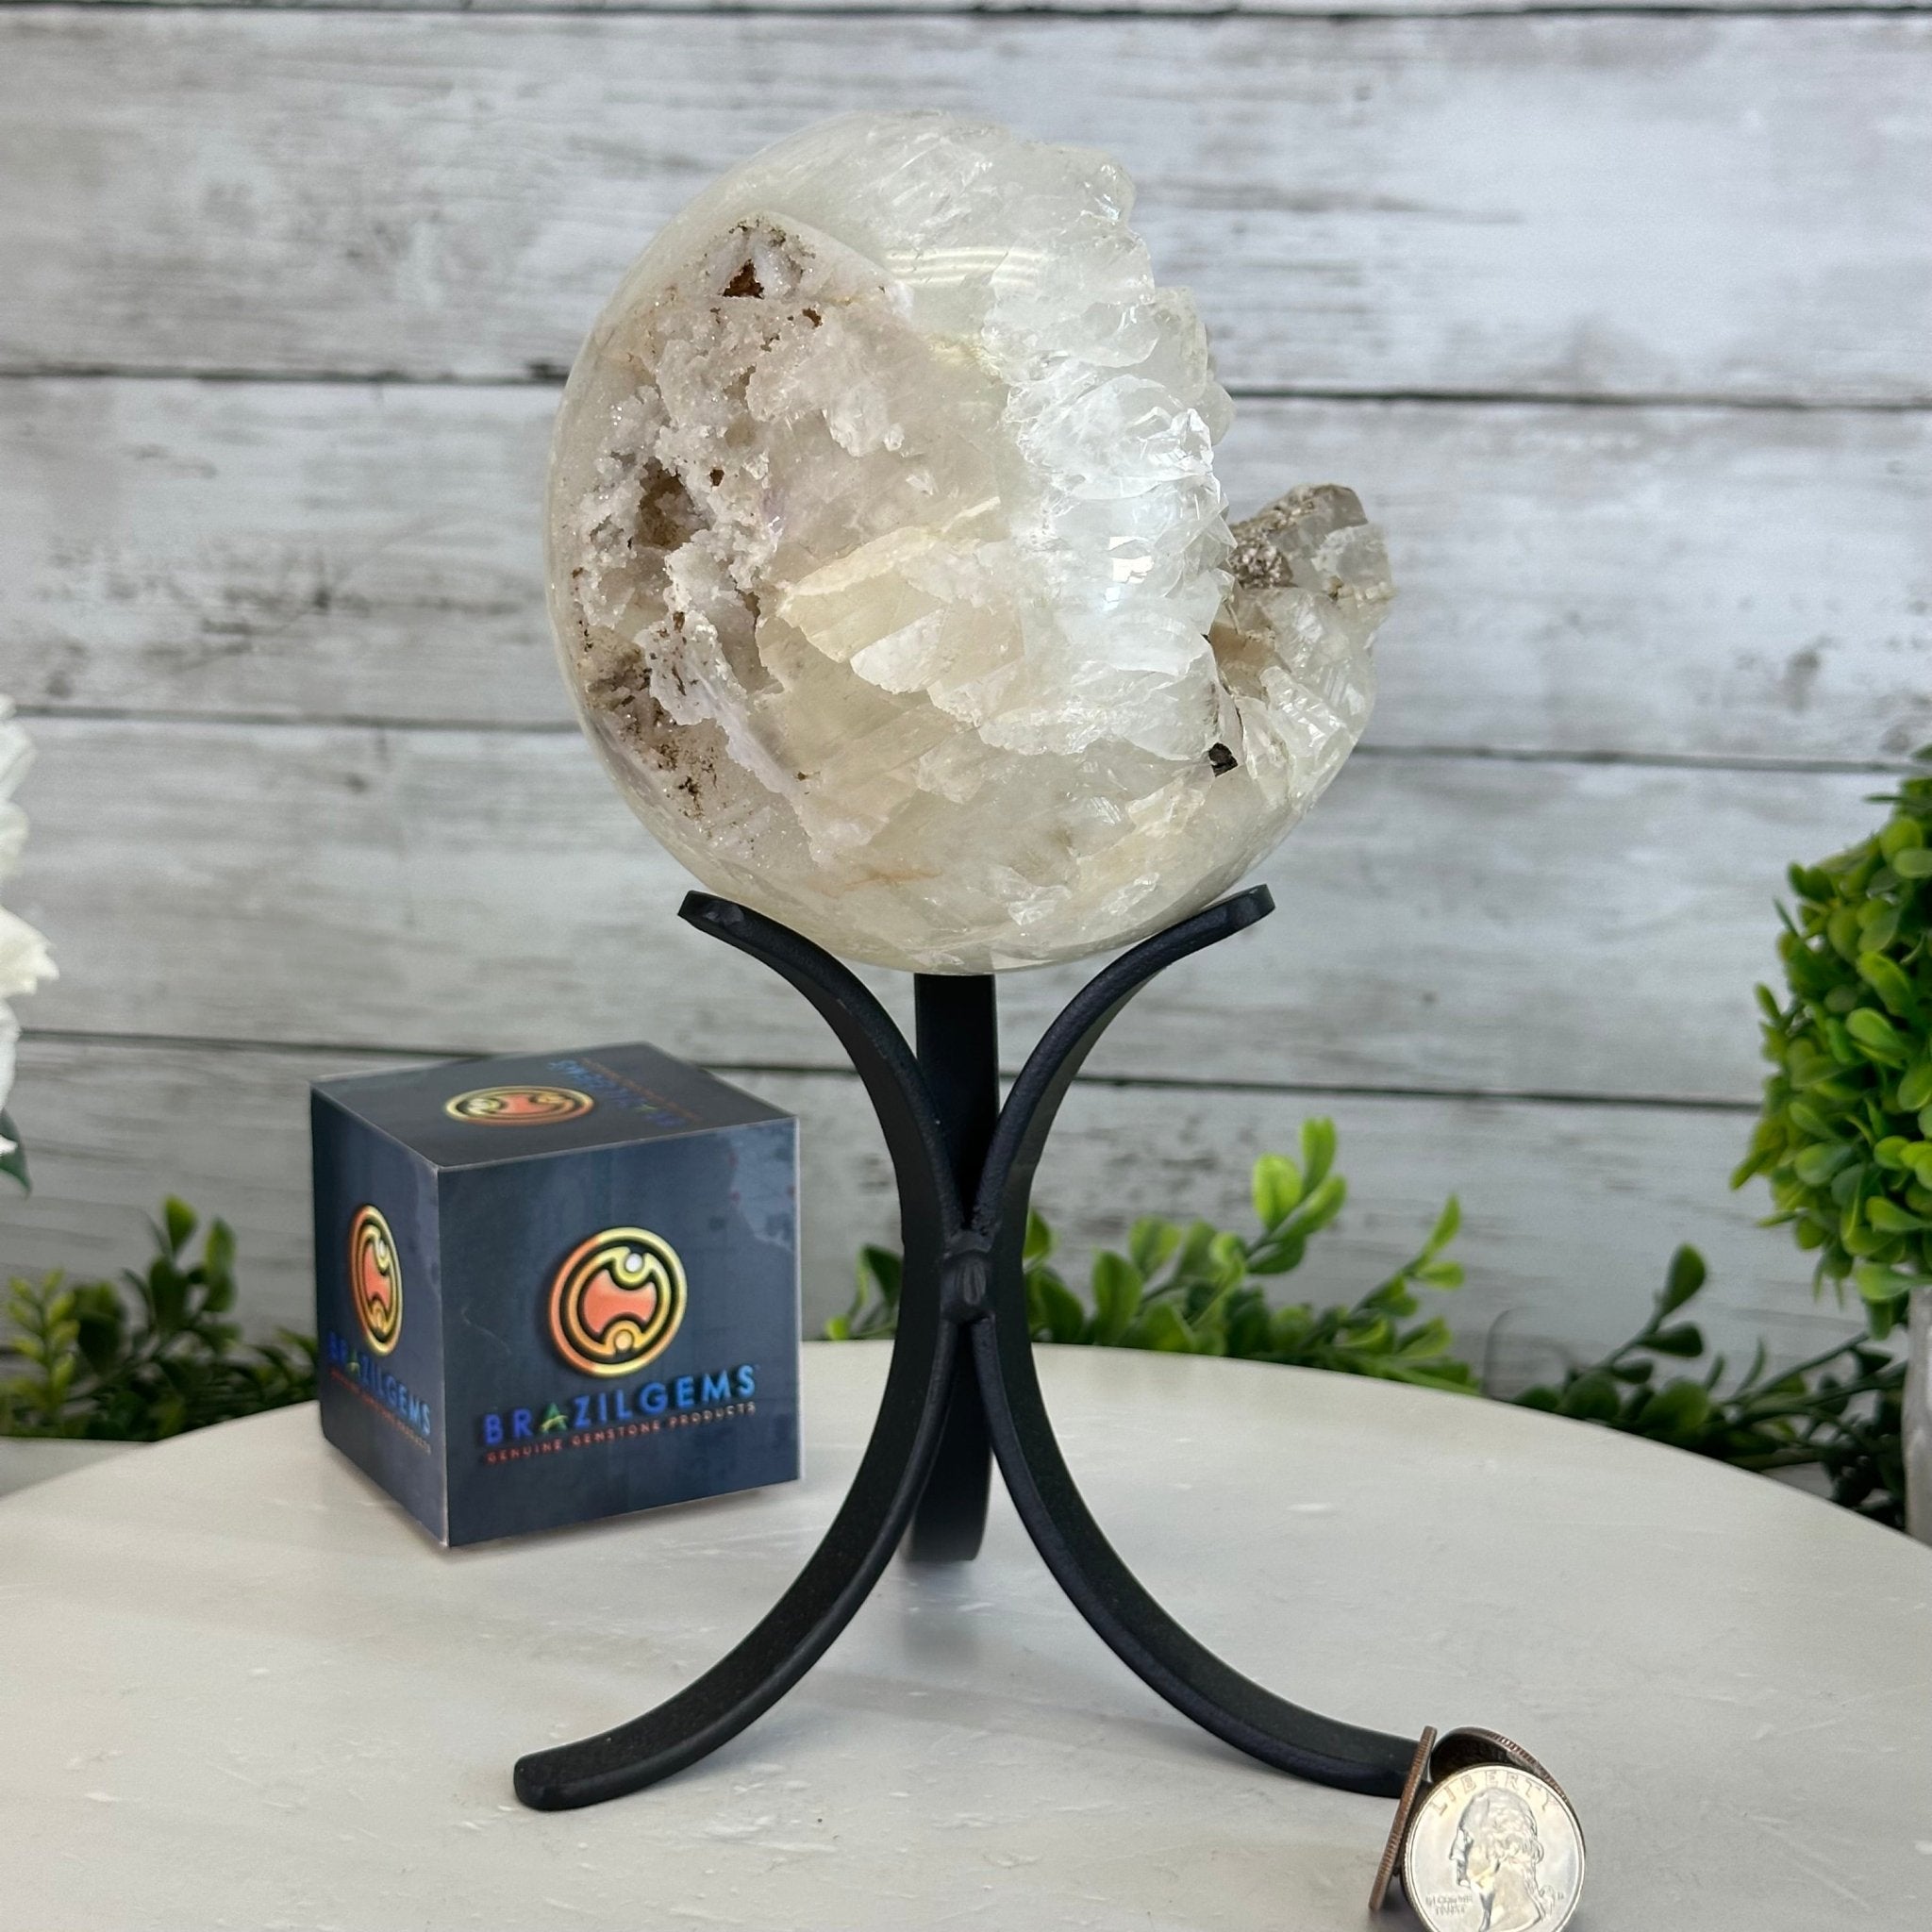 Druzy White Amethyst Sphere on a Metal Stand, 3.6 lbs & 9" Tall #5630-0056 - Brazil GemsBrazil GemsDruzy White Amethyst Sphere on a Metal Stand, 3.6 lbs & 9" Tall #5630-0056Spheres5630-0056